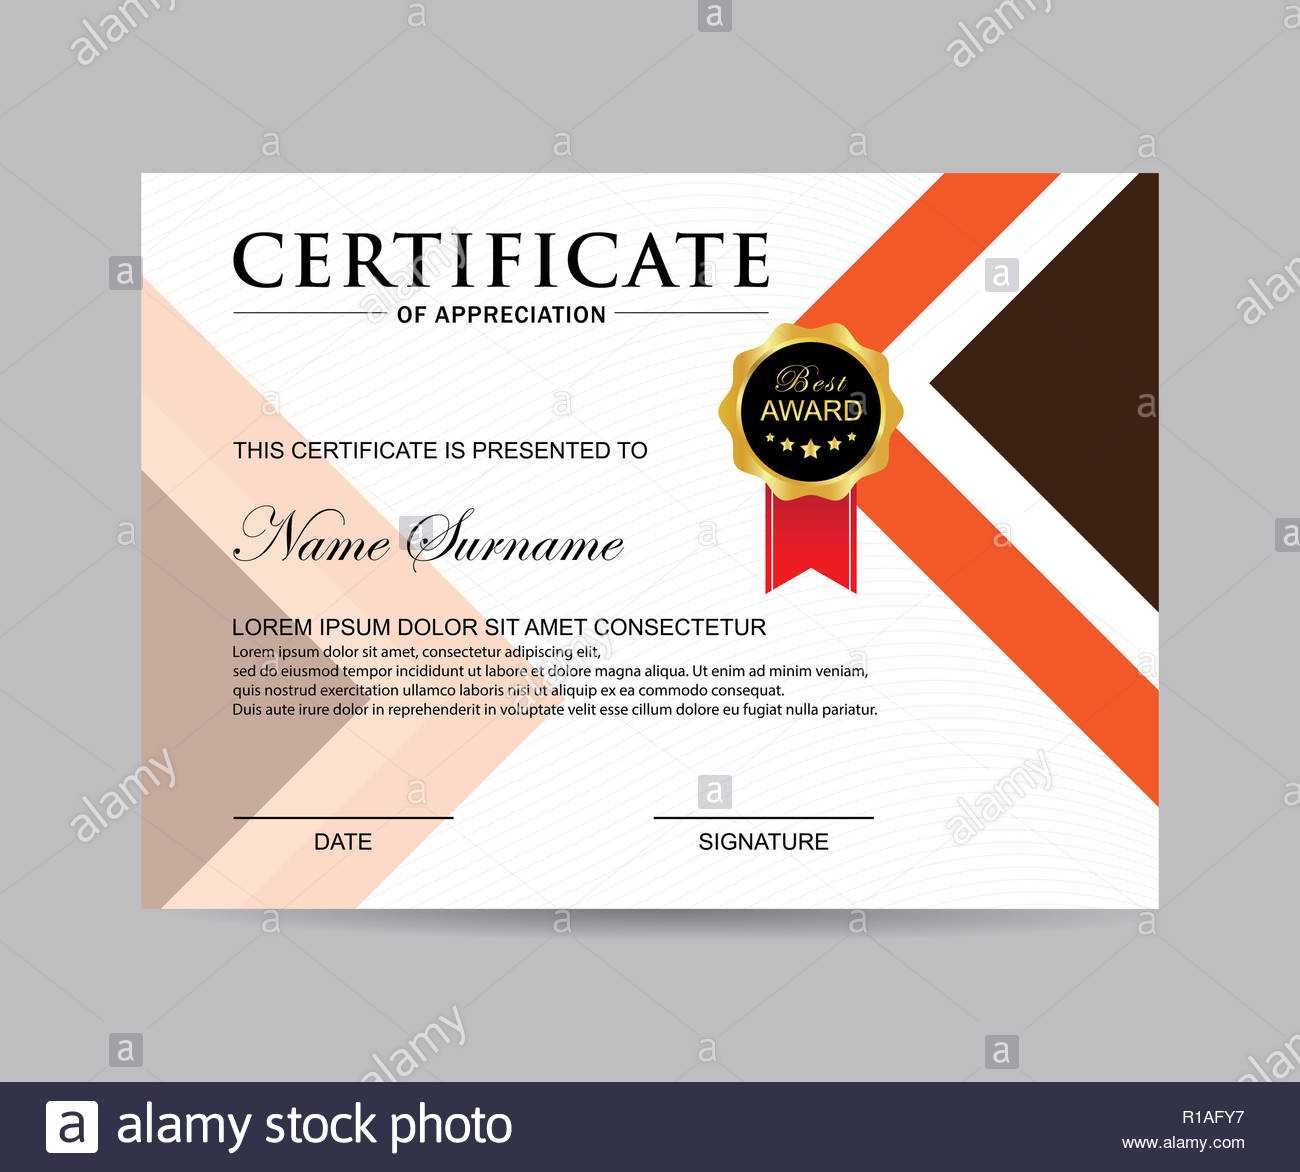 Modern Certificate Template And Background Stock Photo Intended For Borderless Certificate Templates